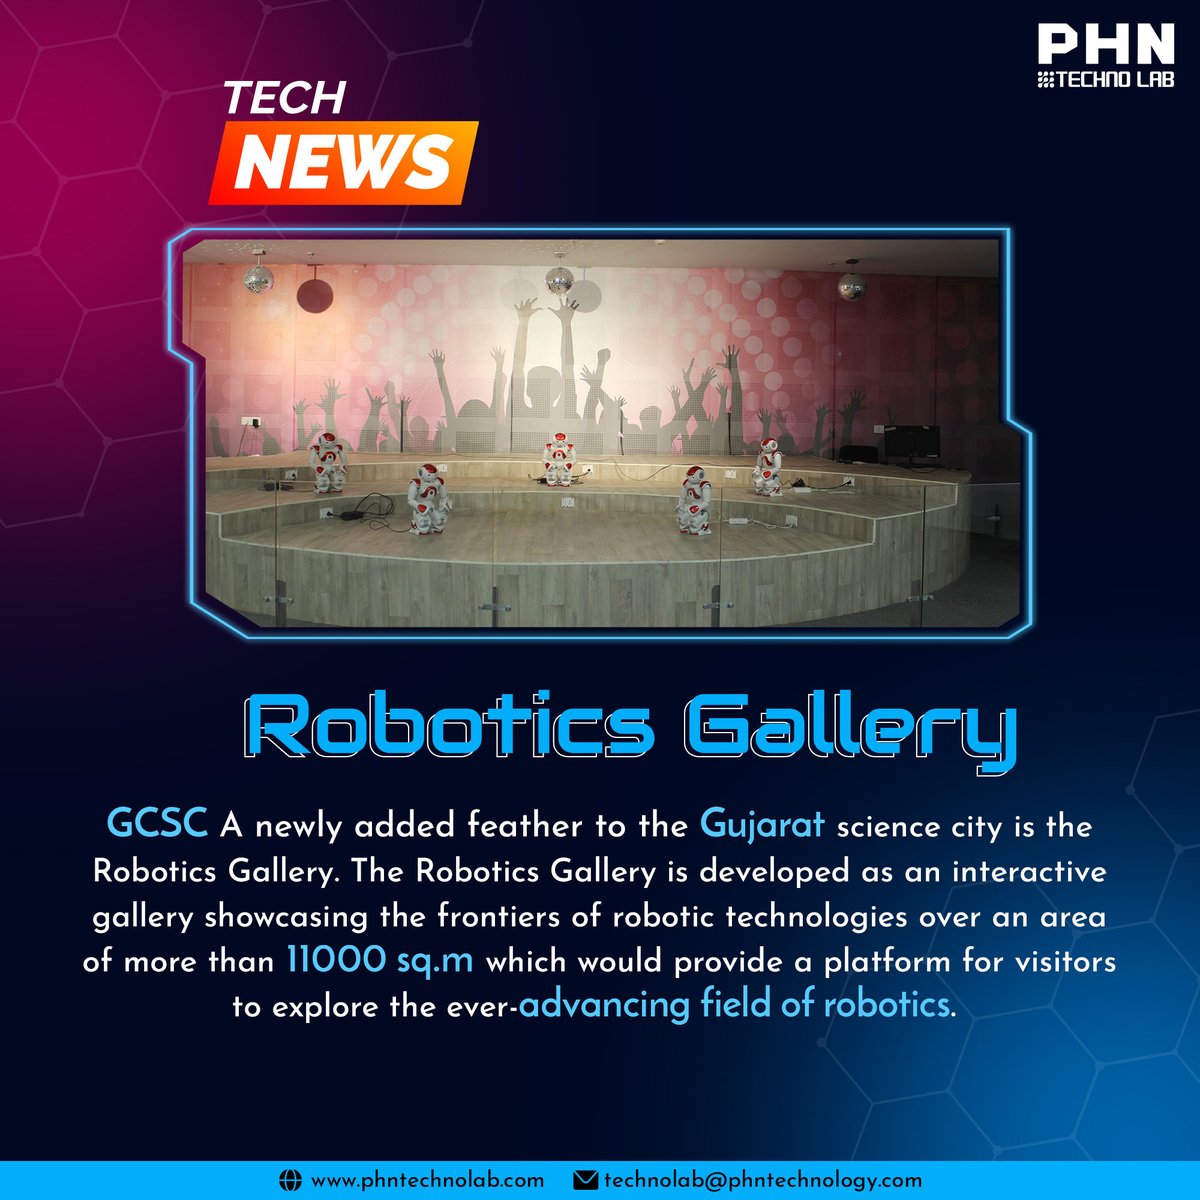 Robotic Park in Gujarat?
 
GCSC A newly added feather to the Gujarat science city is the Robotics Gallery.
.
.
.

#Roboticsgallery #AI #Technews #Artificialinteligent #technews #ailab #ai #artificialinteligent #Phntechnology #Phntechnolab #roborics #roboticslab #STEM #STEMLab